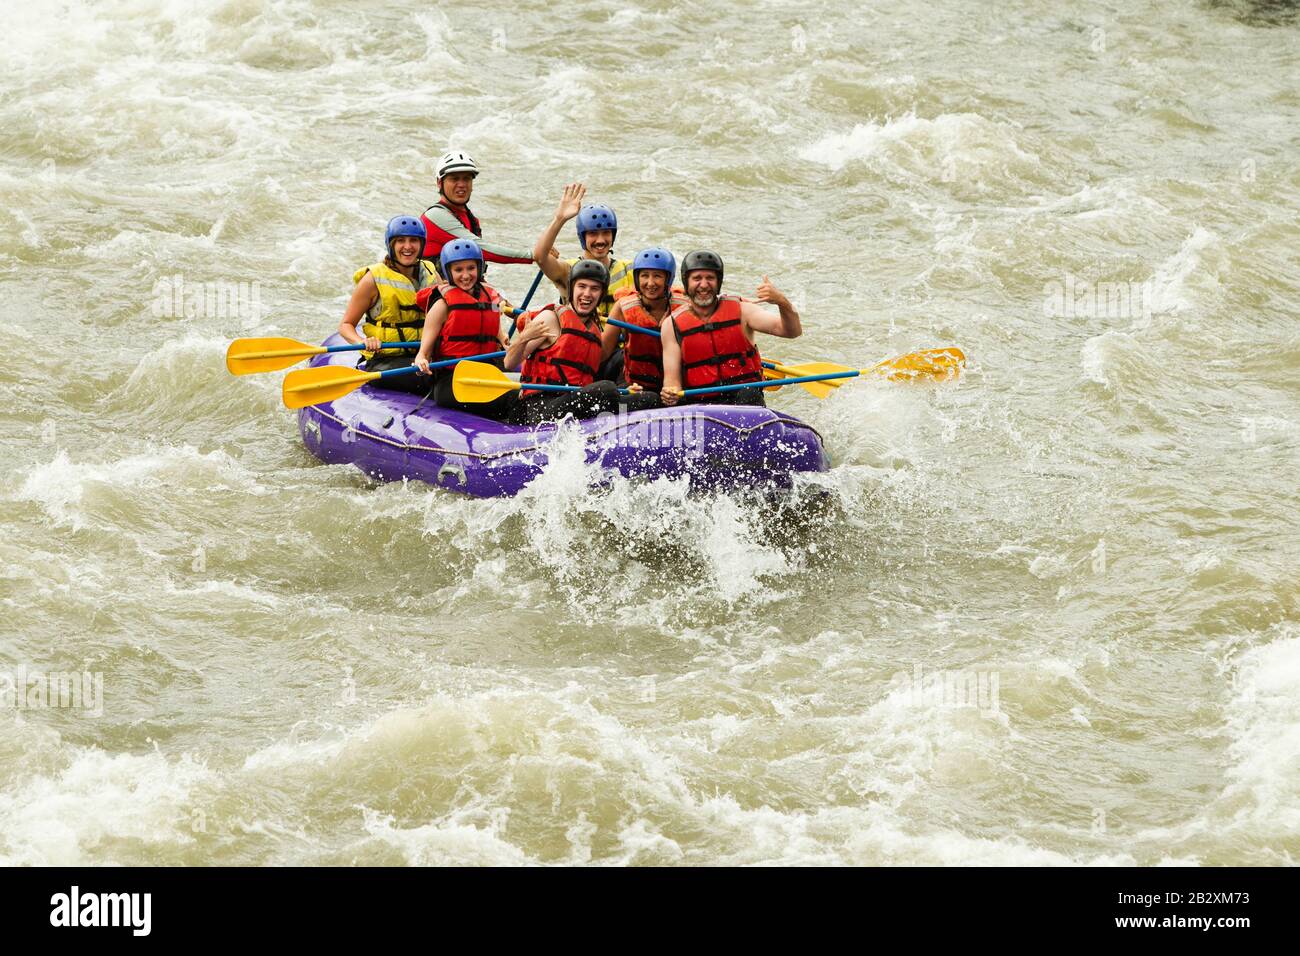 Whitewater Rafting Boat Union Of 7 Human Stock Photo